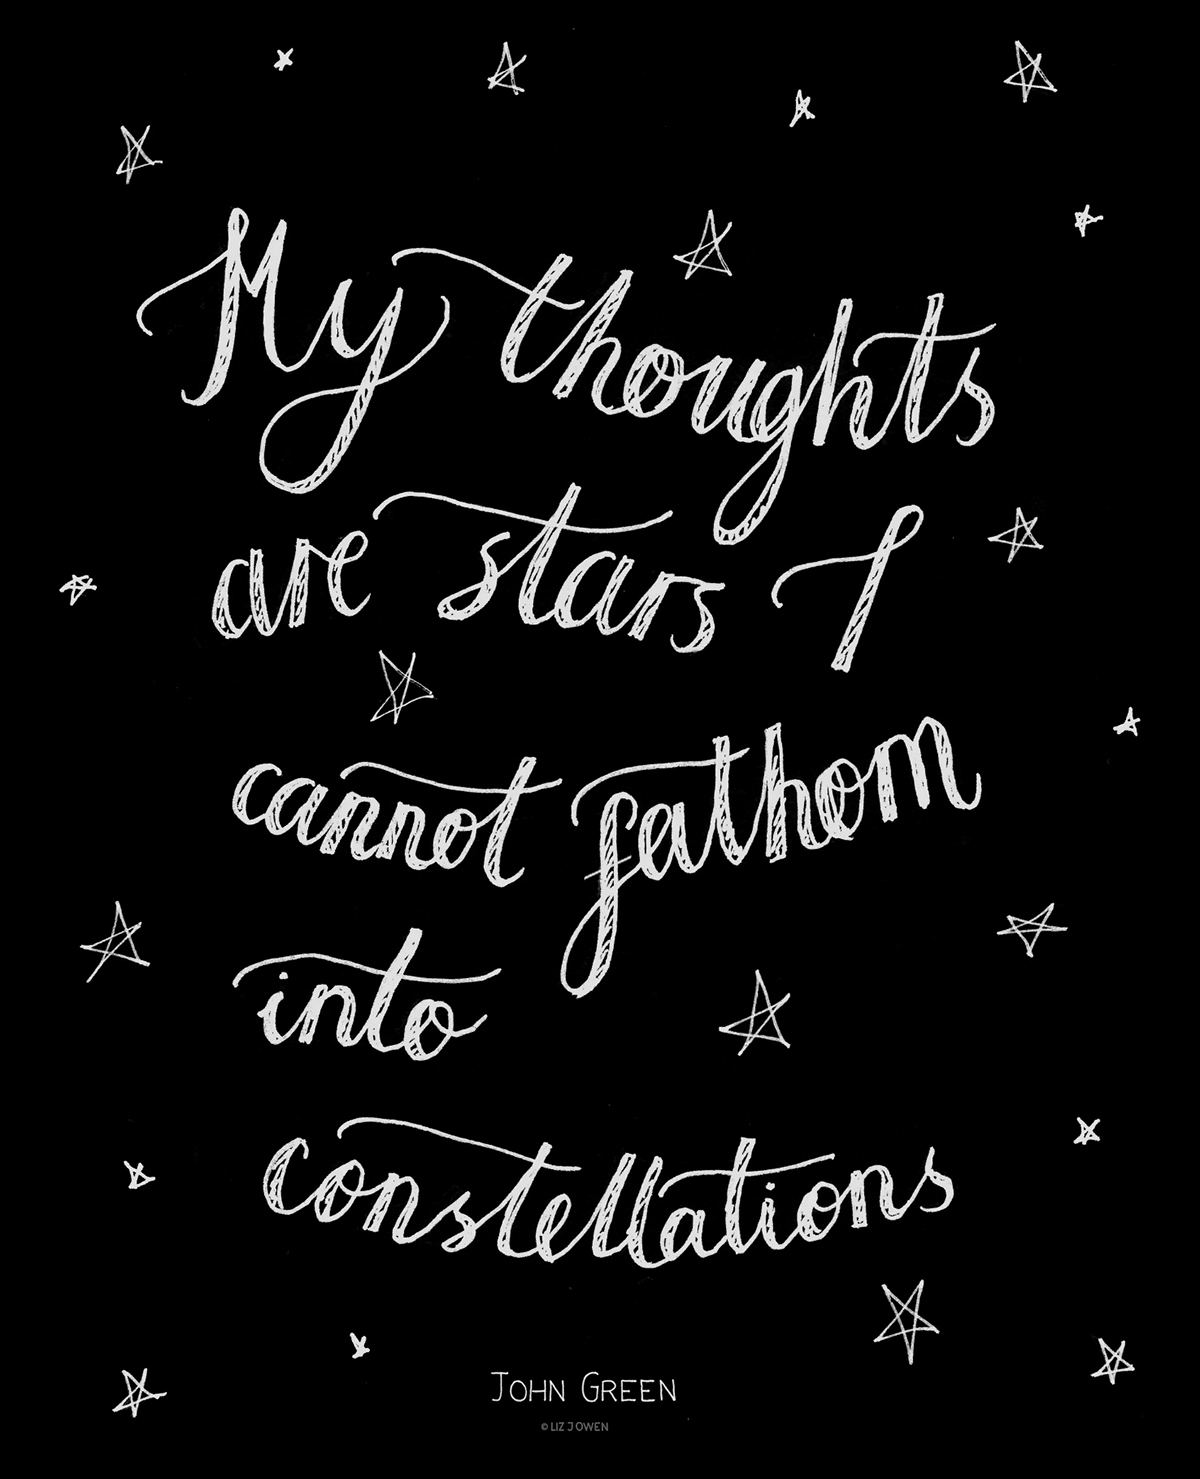 john green stars quote book Love HAND LETTERING